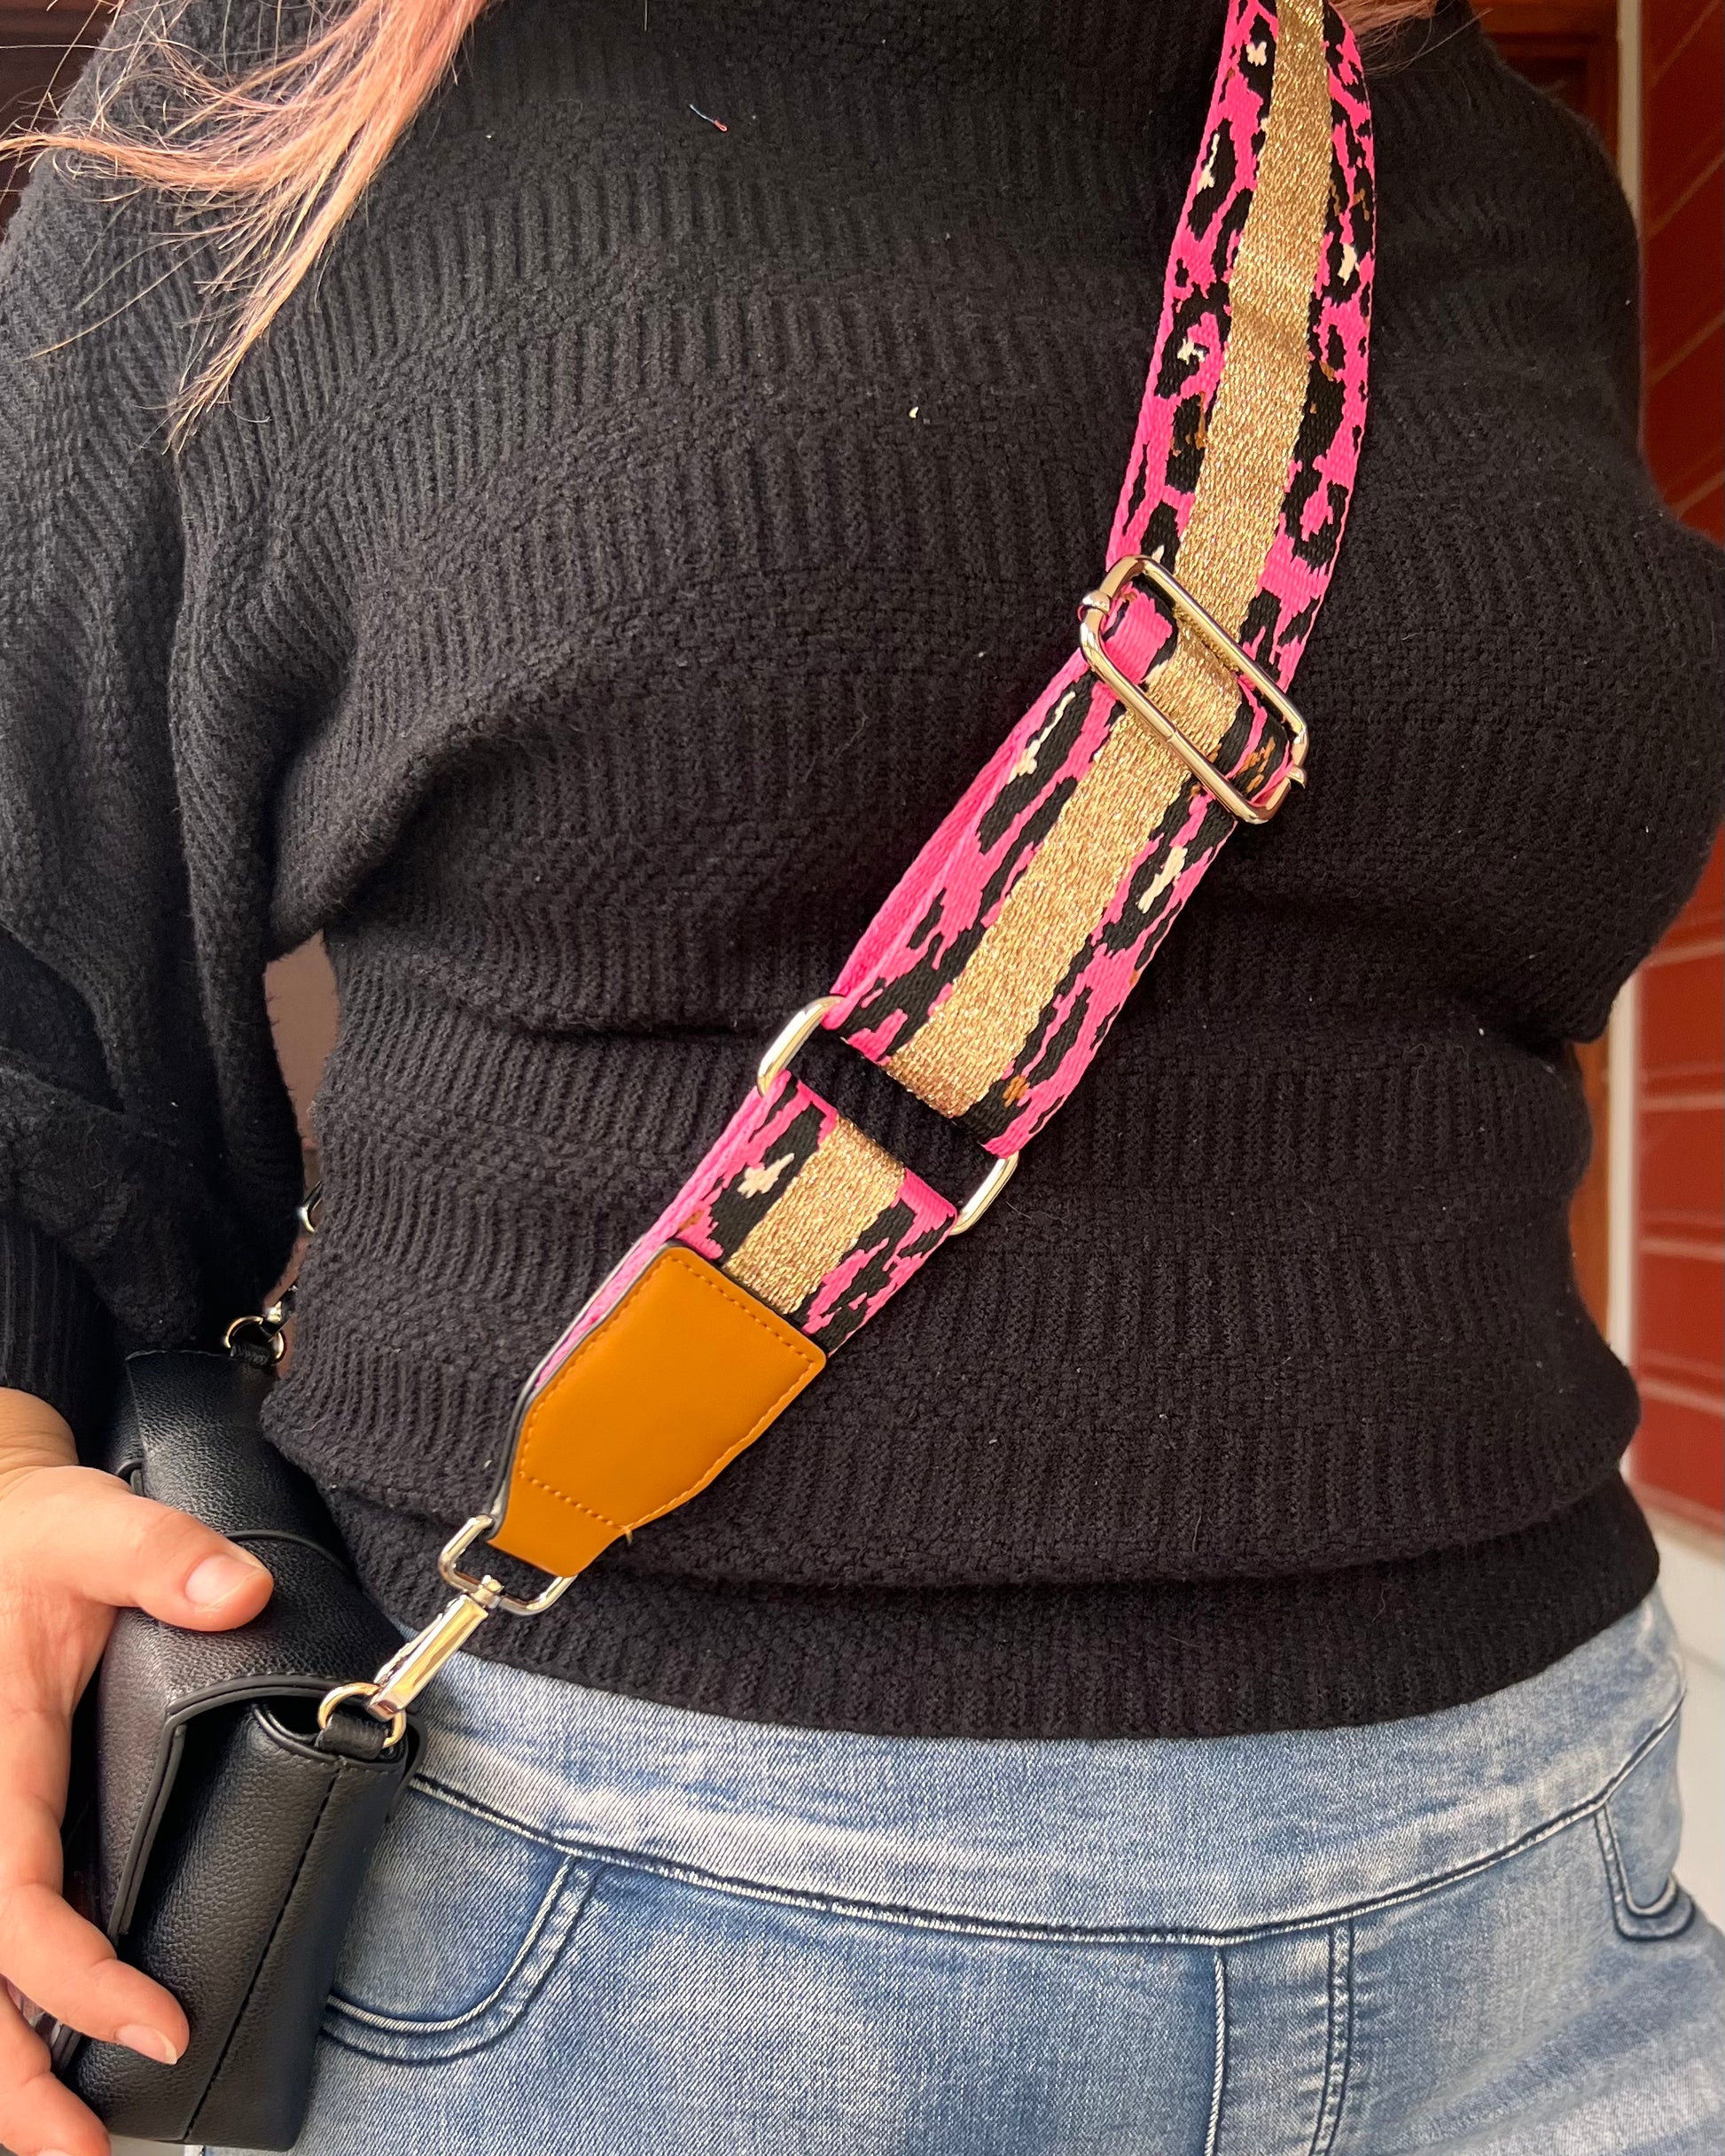 Animal Weave Bag Strap: Change up your bag without the stress of moving all the contents. Switch out your strap to one of our funky adjustable bag straps
Features:

Animal weave edge with g - Ciao Bella Dresses 